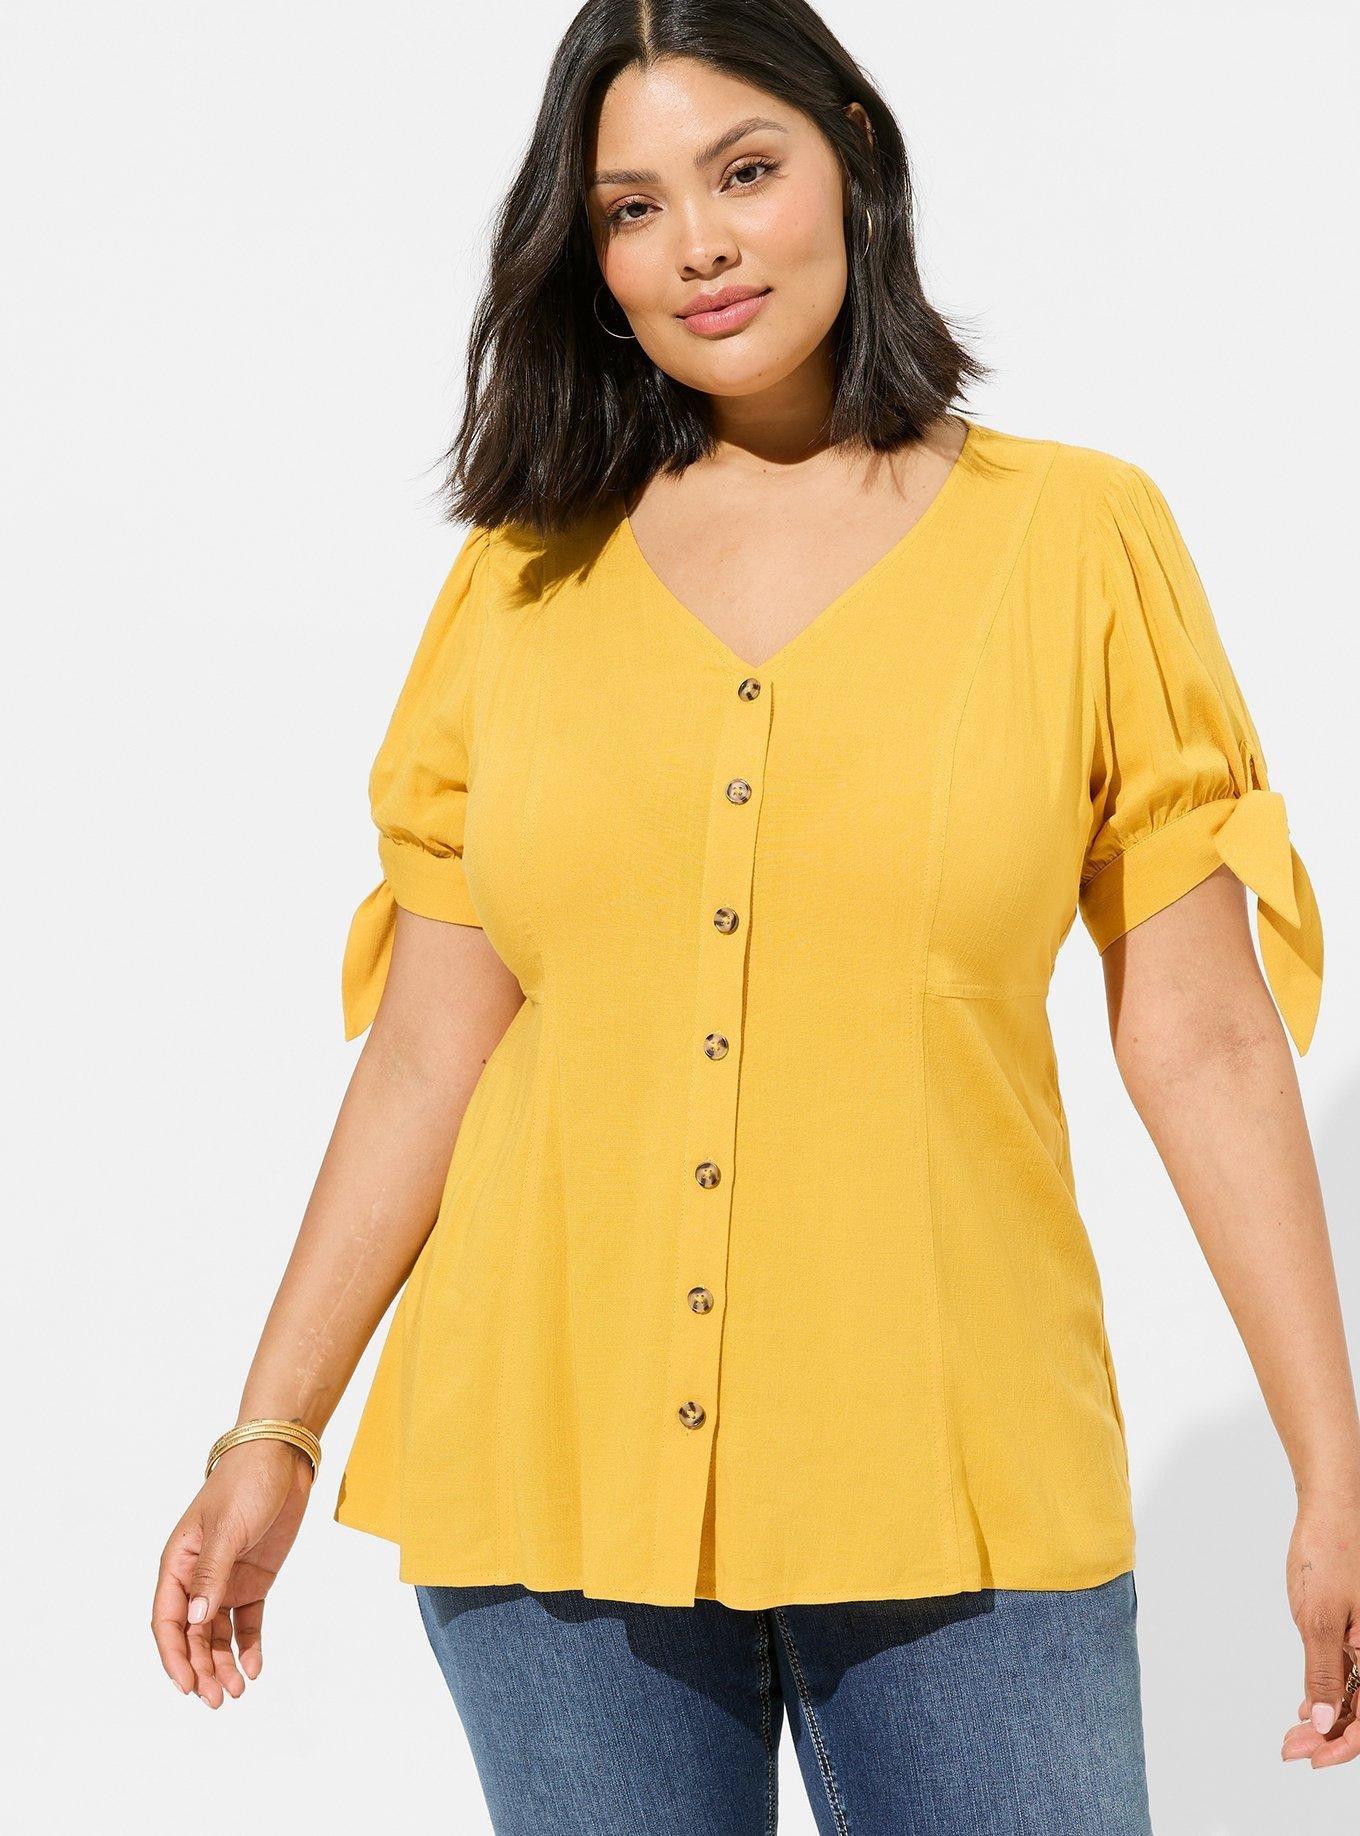 Plus Size - Fit & Flare Rayon Slub Button Up Tie Sleeve Top - Torrid